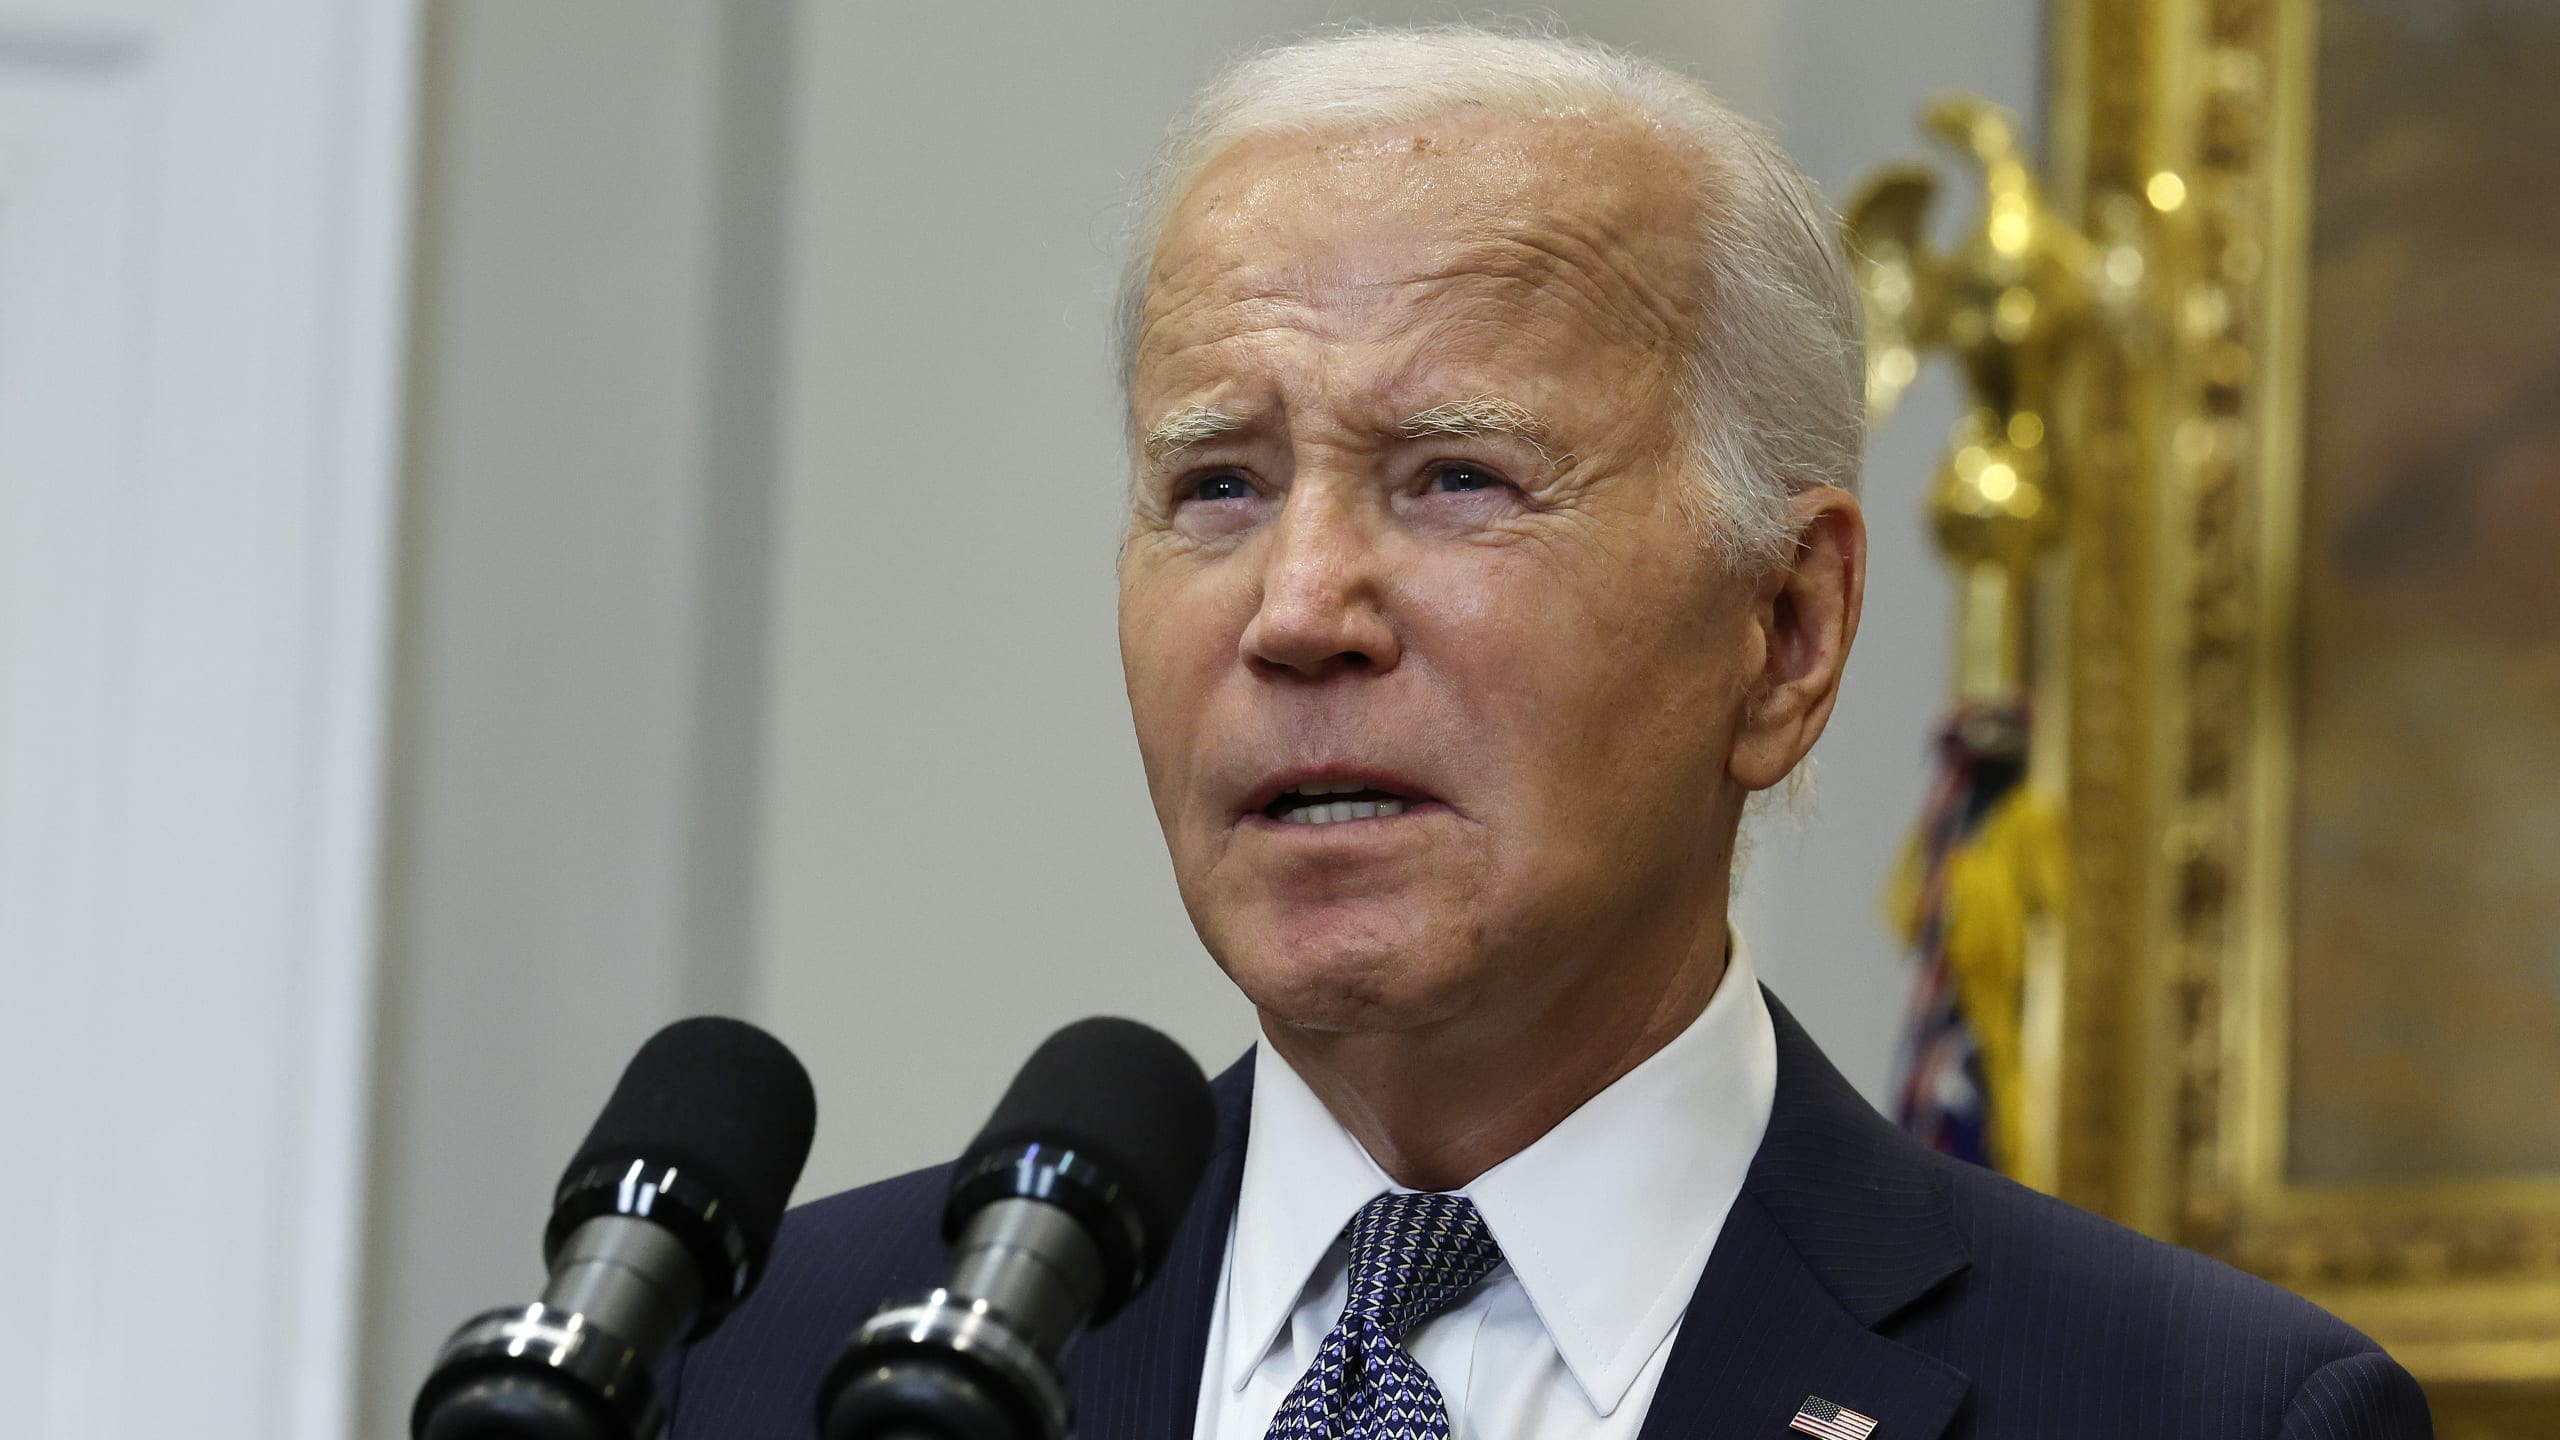 A Biden plan cuts student loan payments for millions to $0. Will it be the next legal battle?